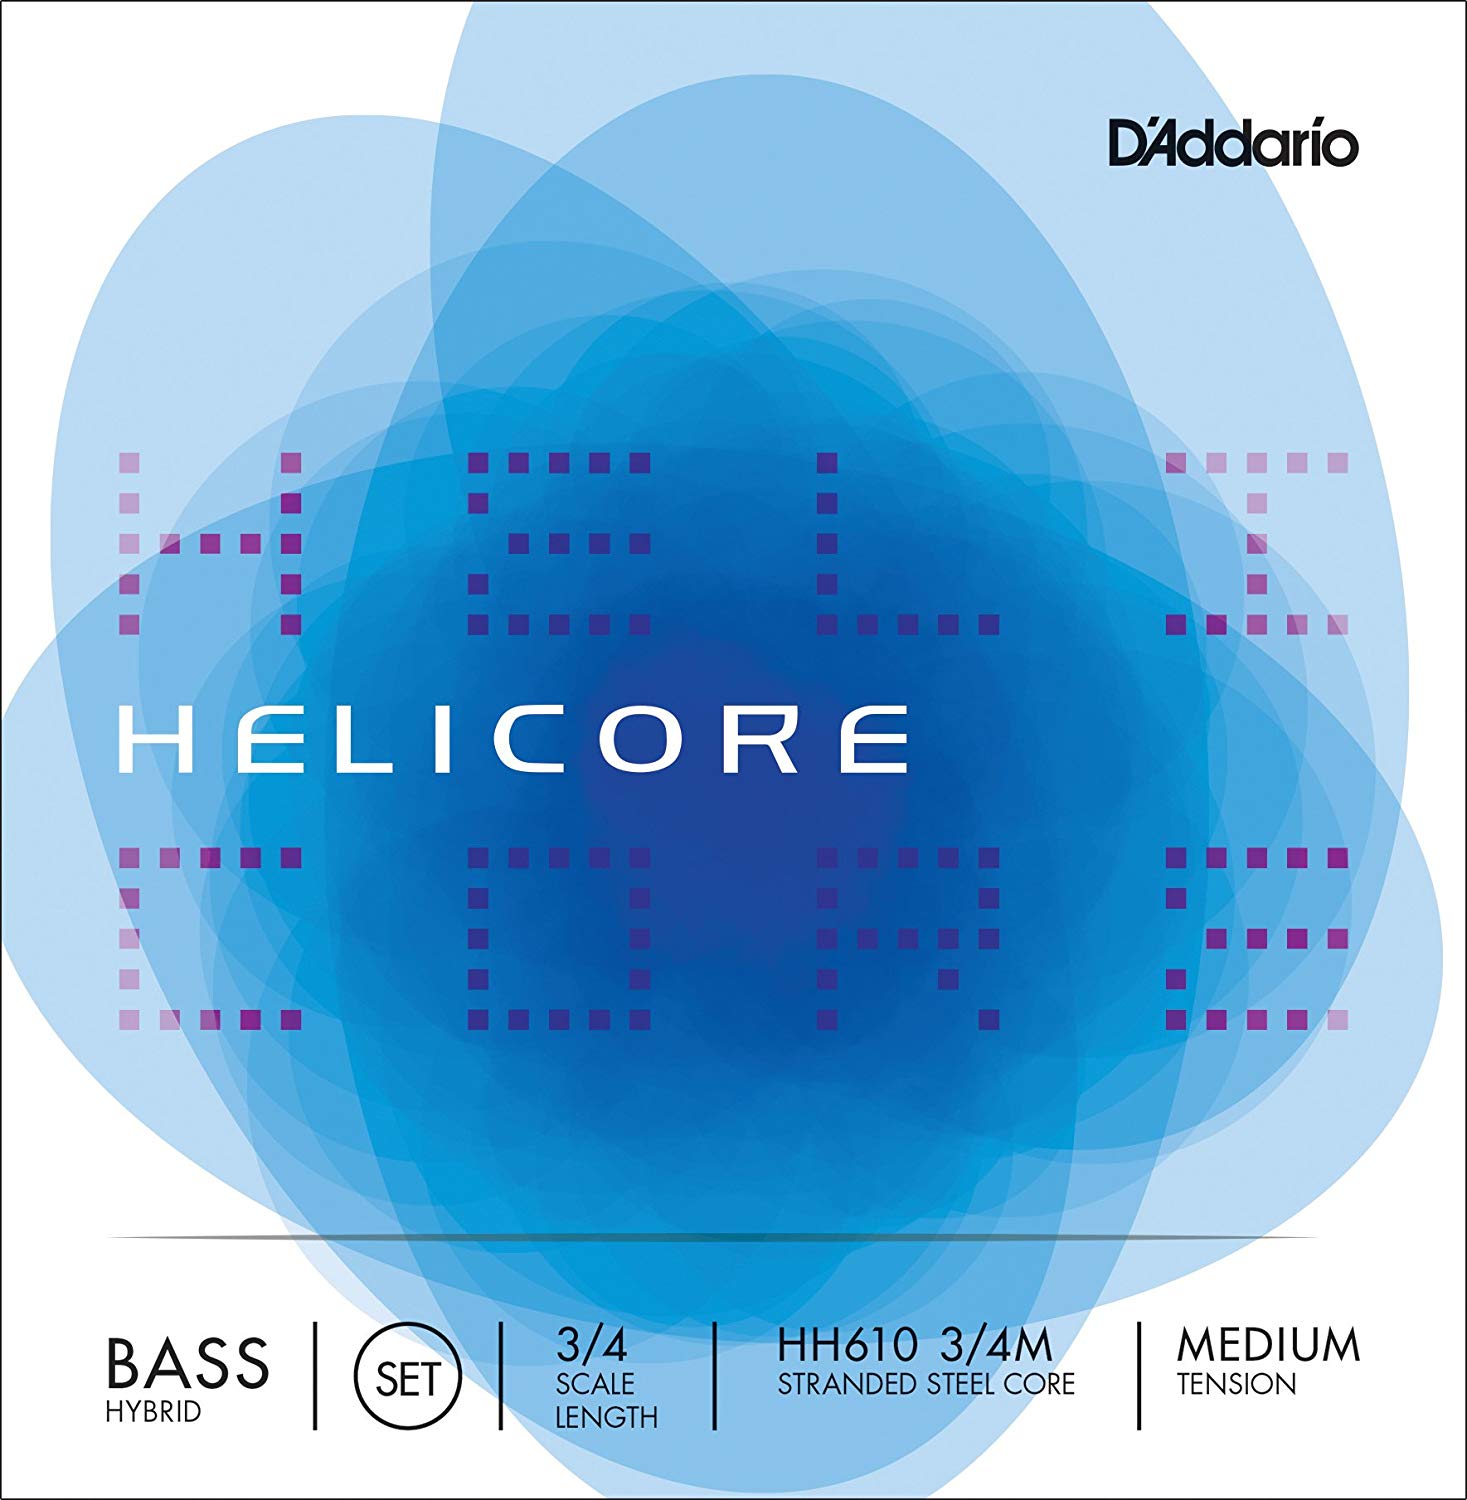 D'Addario Helicore Orchestral Bass String Set in action